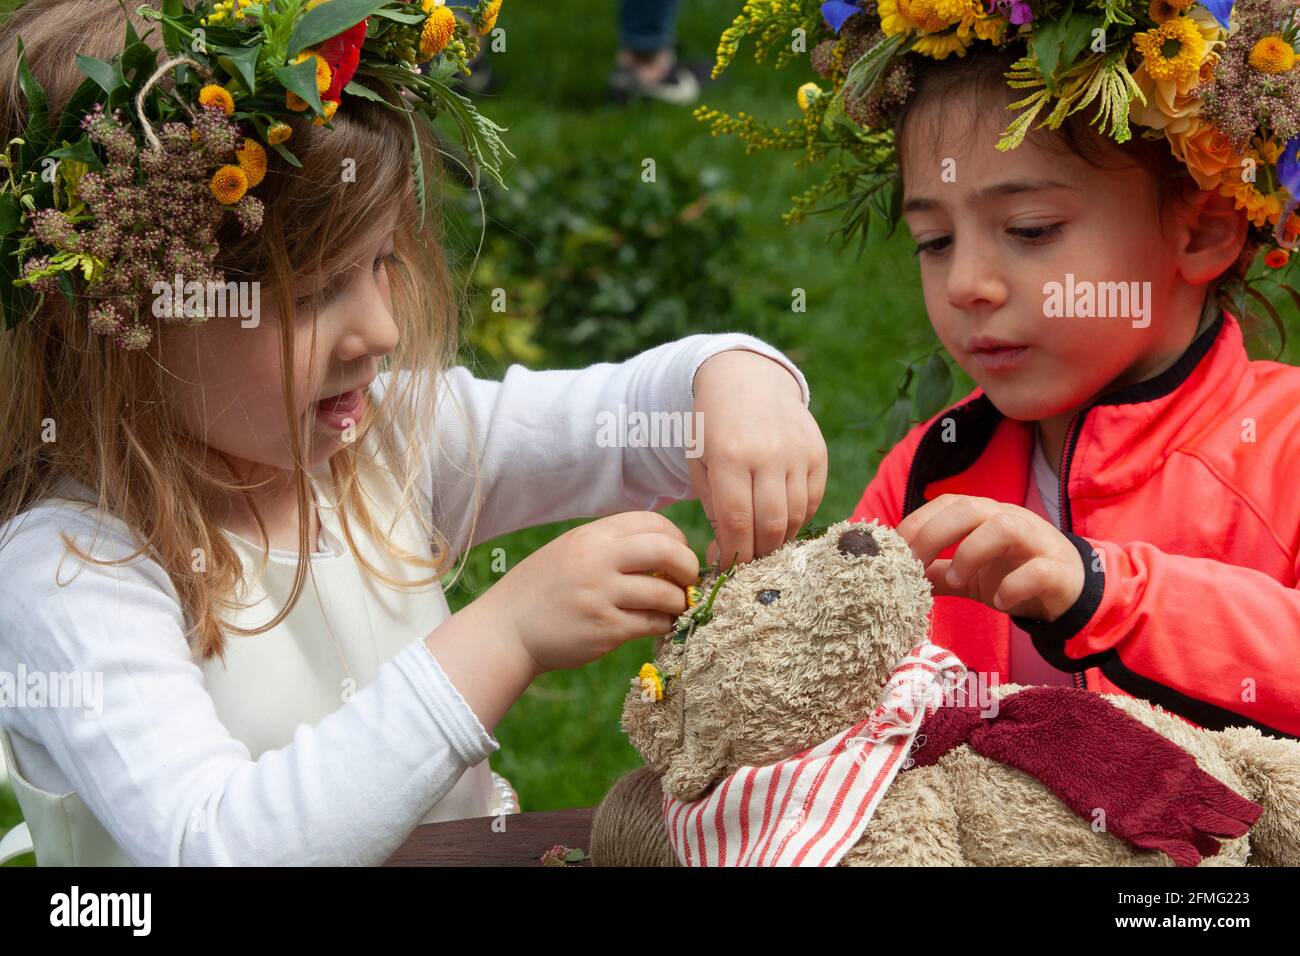 London, UK, 9 May 2021: School friends Emily, age 4 (cream dress) and Emelia, age 5 (orange cardigan), make a flower crowns to celebrate Garden Day, and one for the class teddy bear too. This event was at Chelsea Physic Garden and led by florist Fran Bailey of The Fresh Flower company. Anna Watson/Alamy Live News Stock Photo